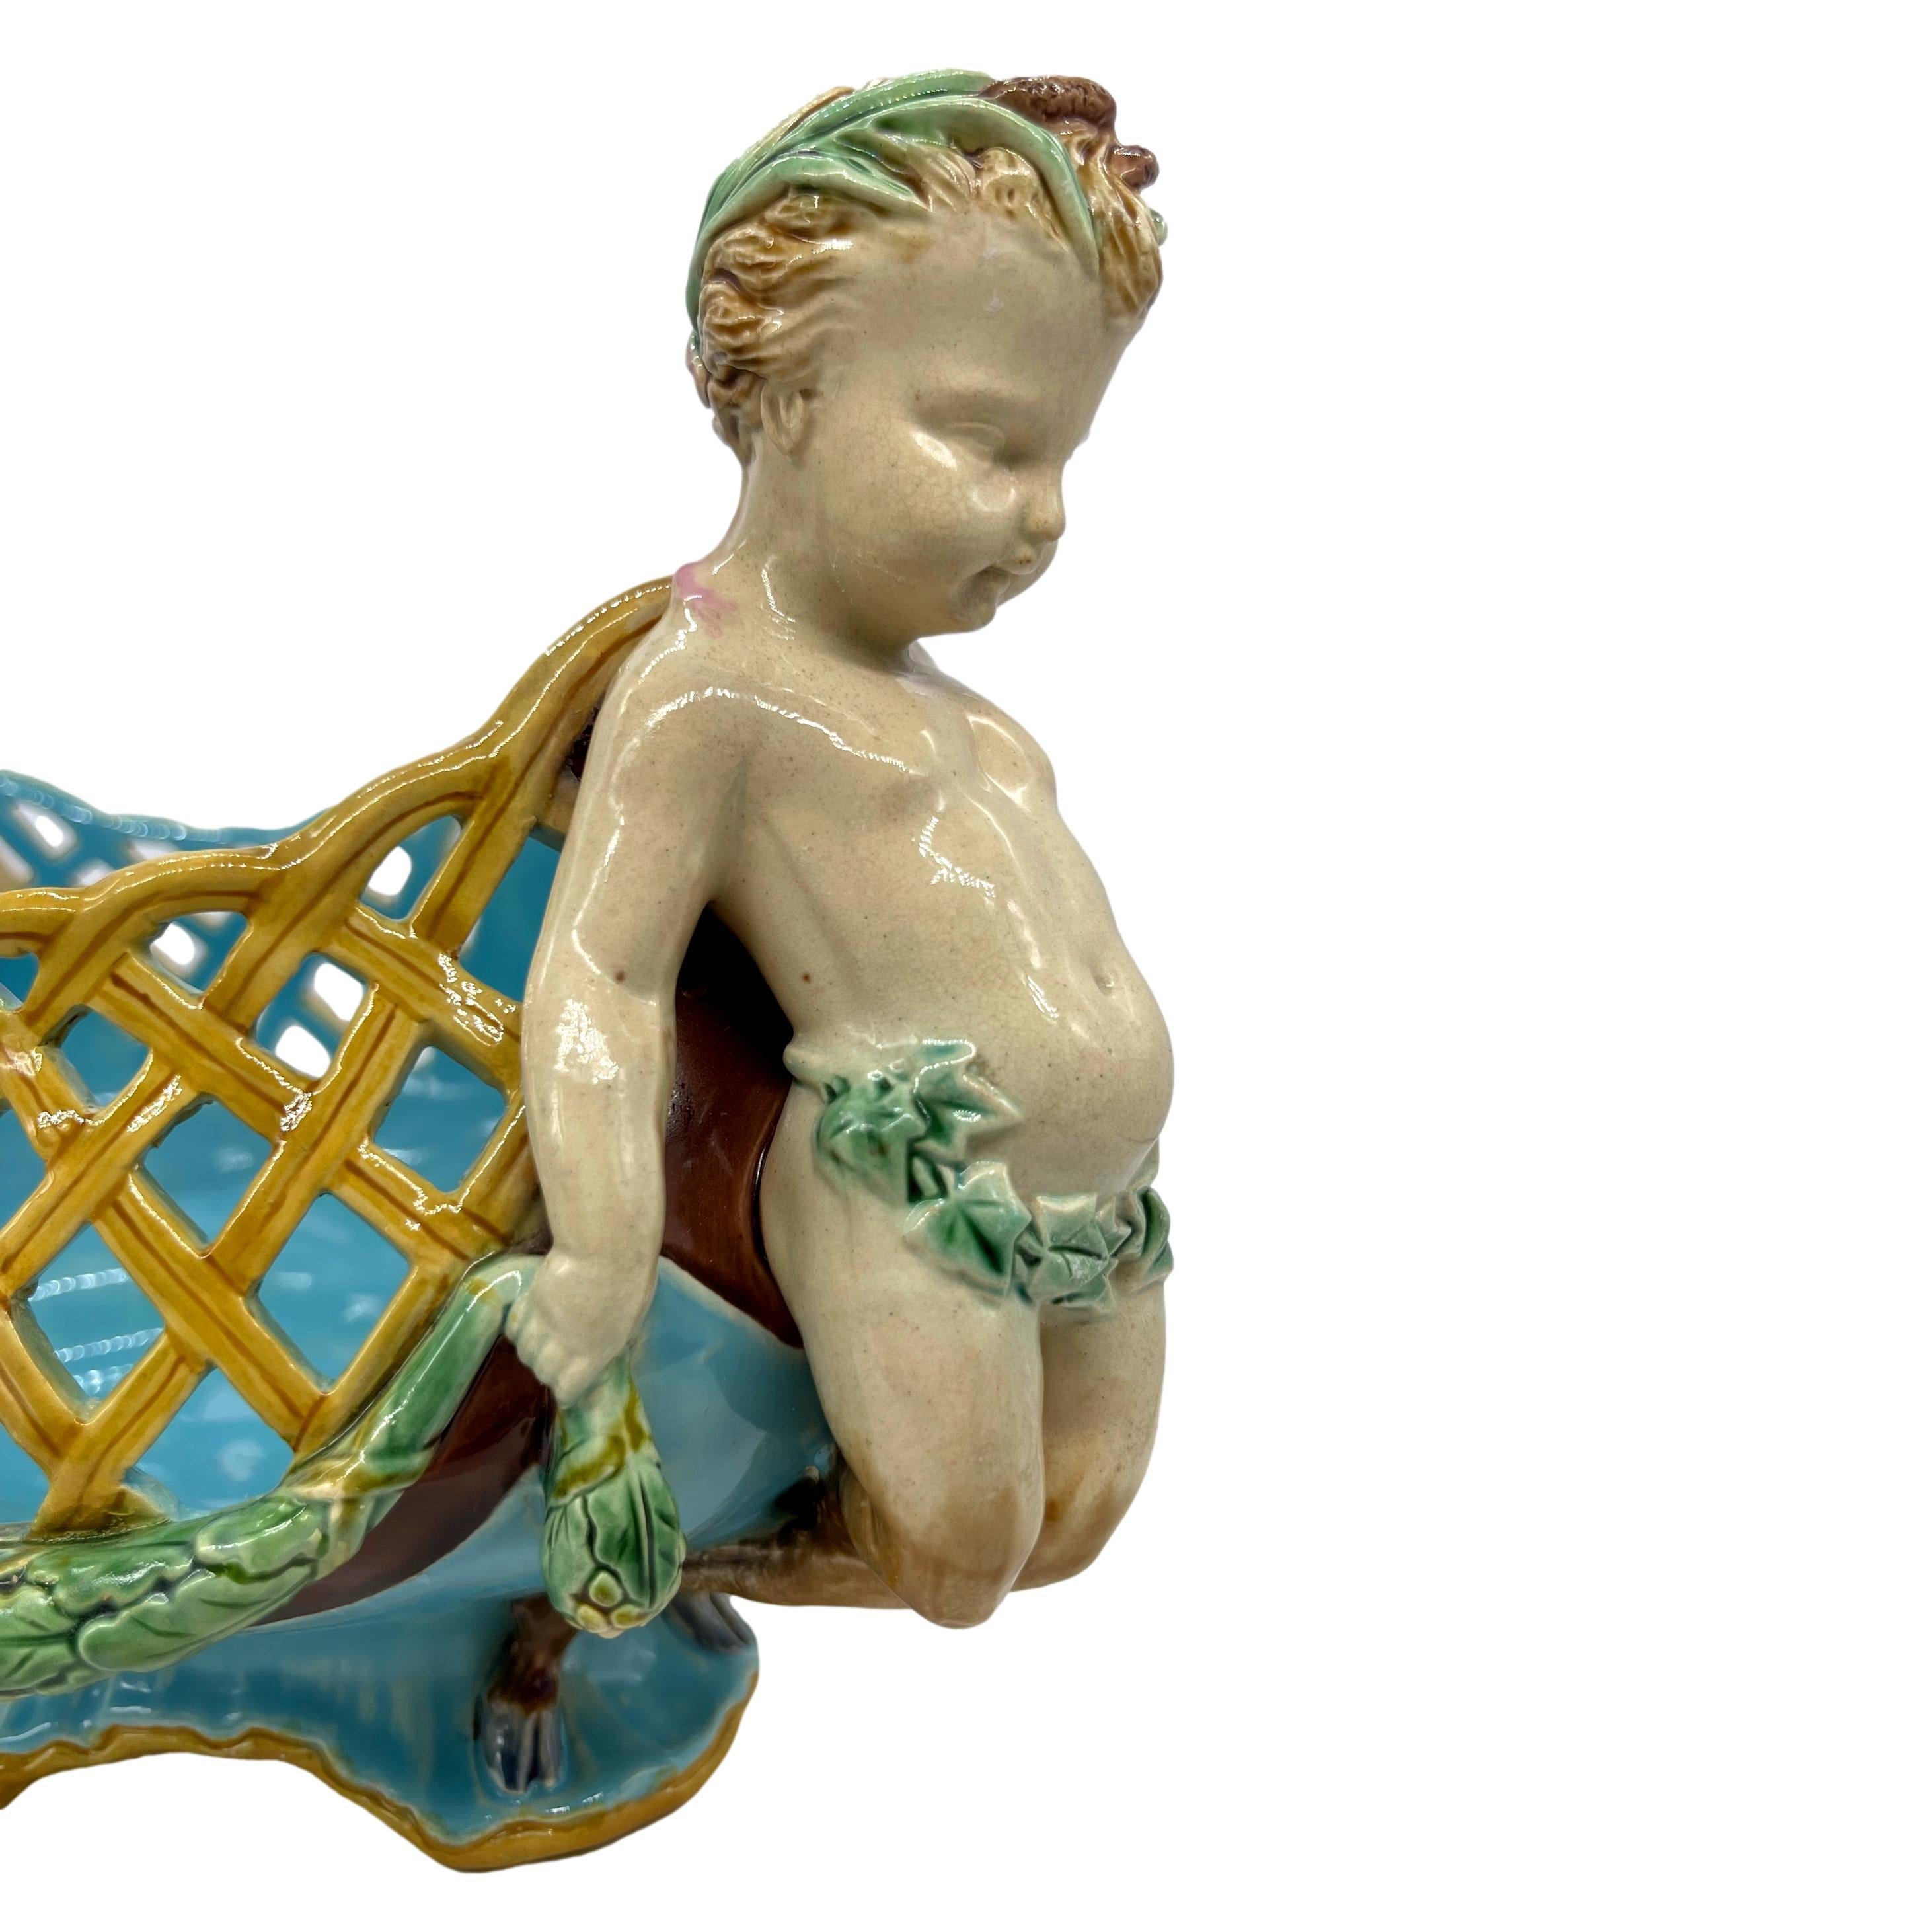 Minton Majolica Faun Reticulated Basket by A. Carrier-Belleuse, Dated 1871 2